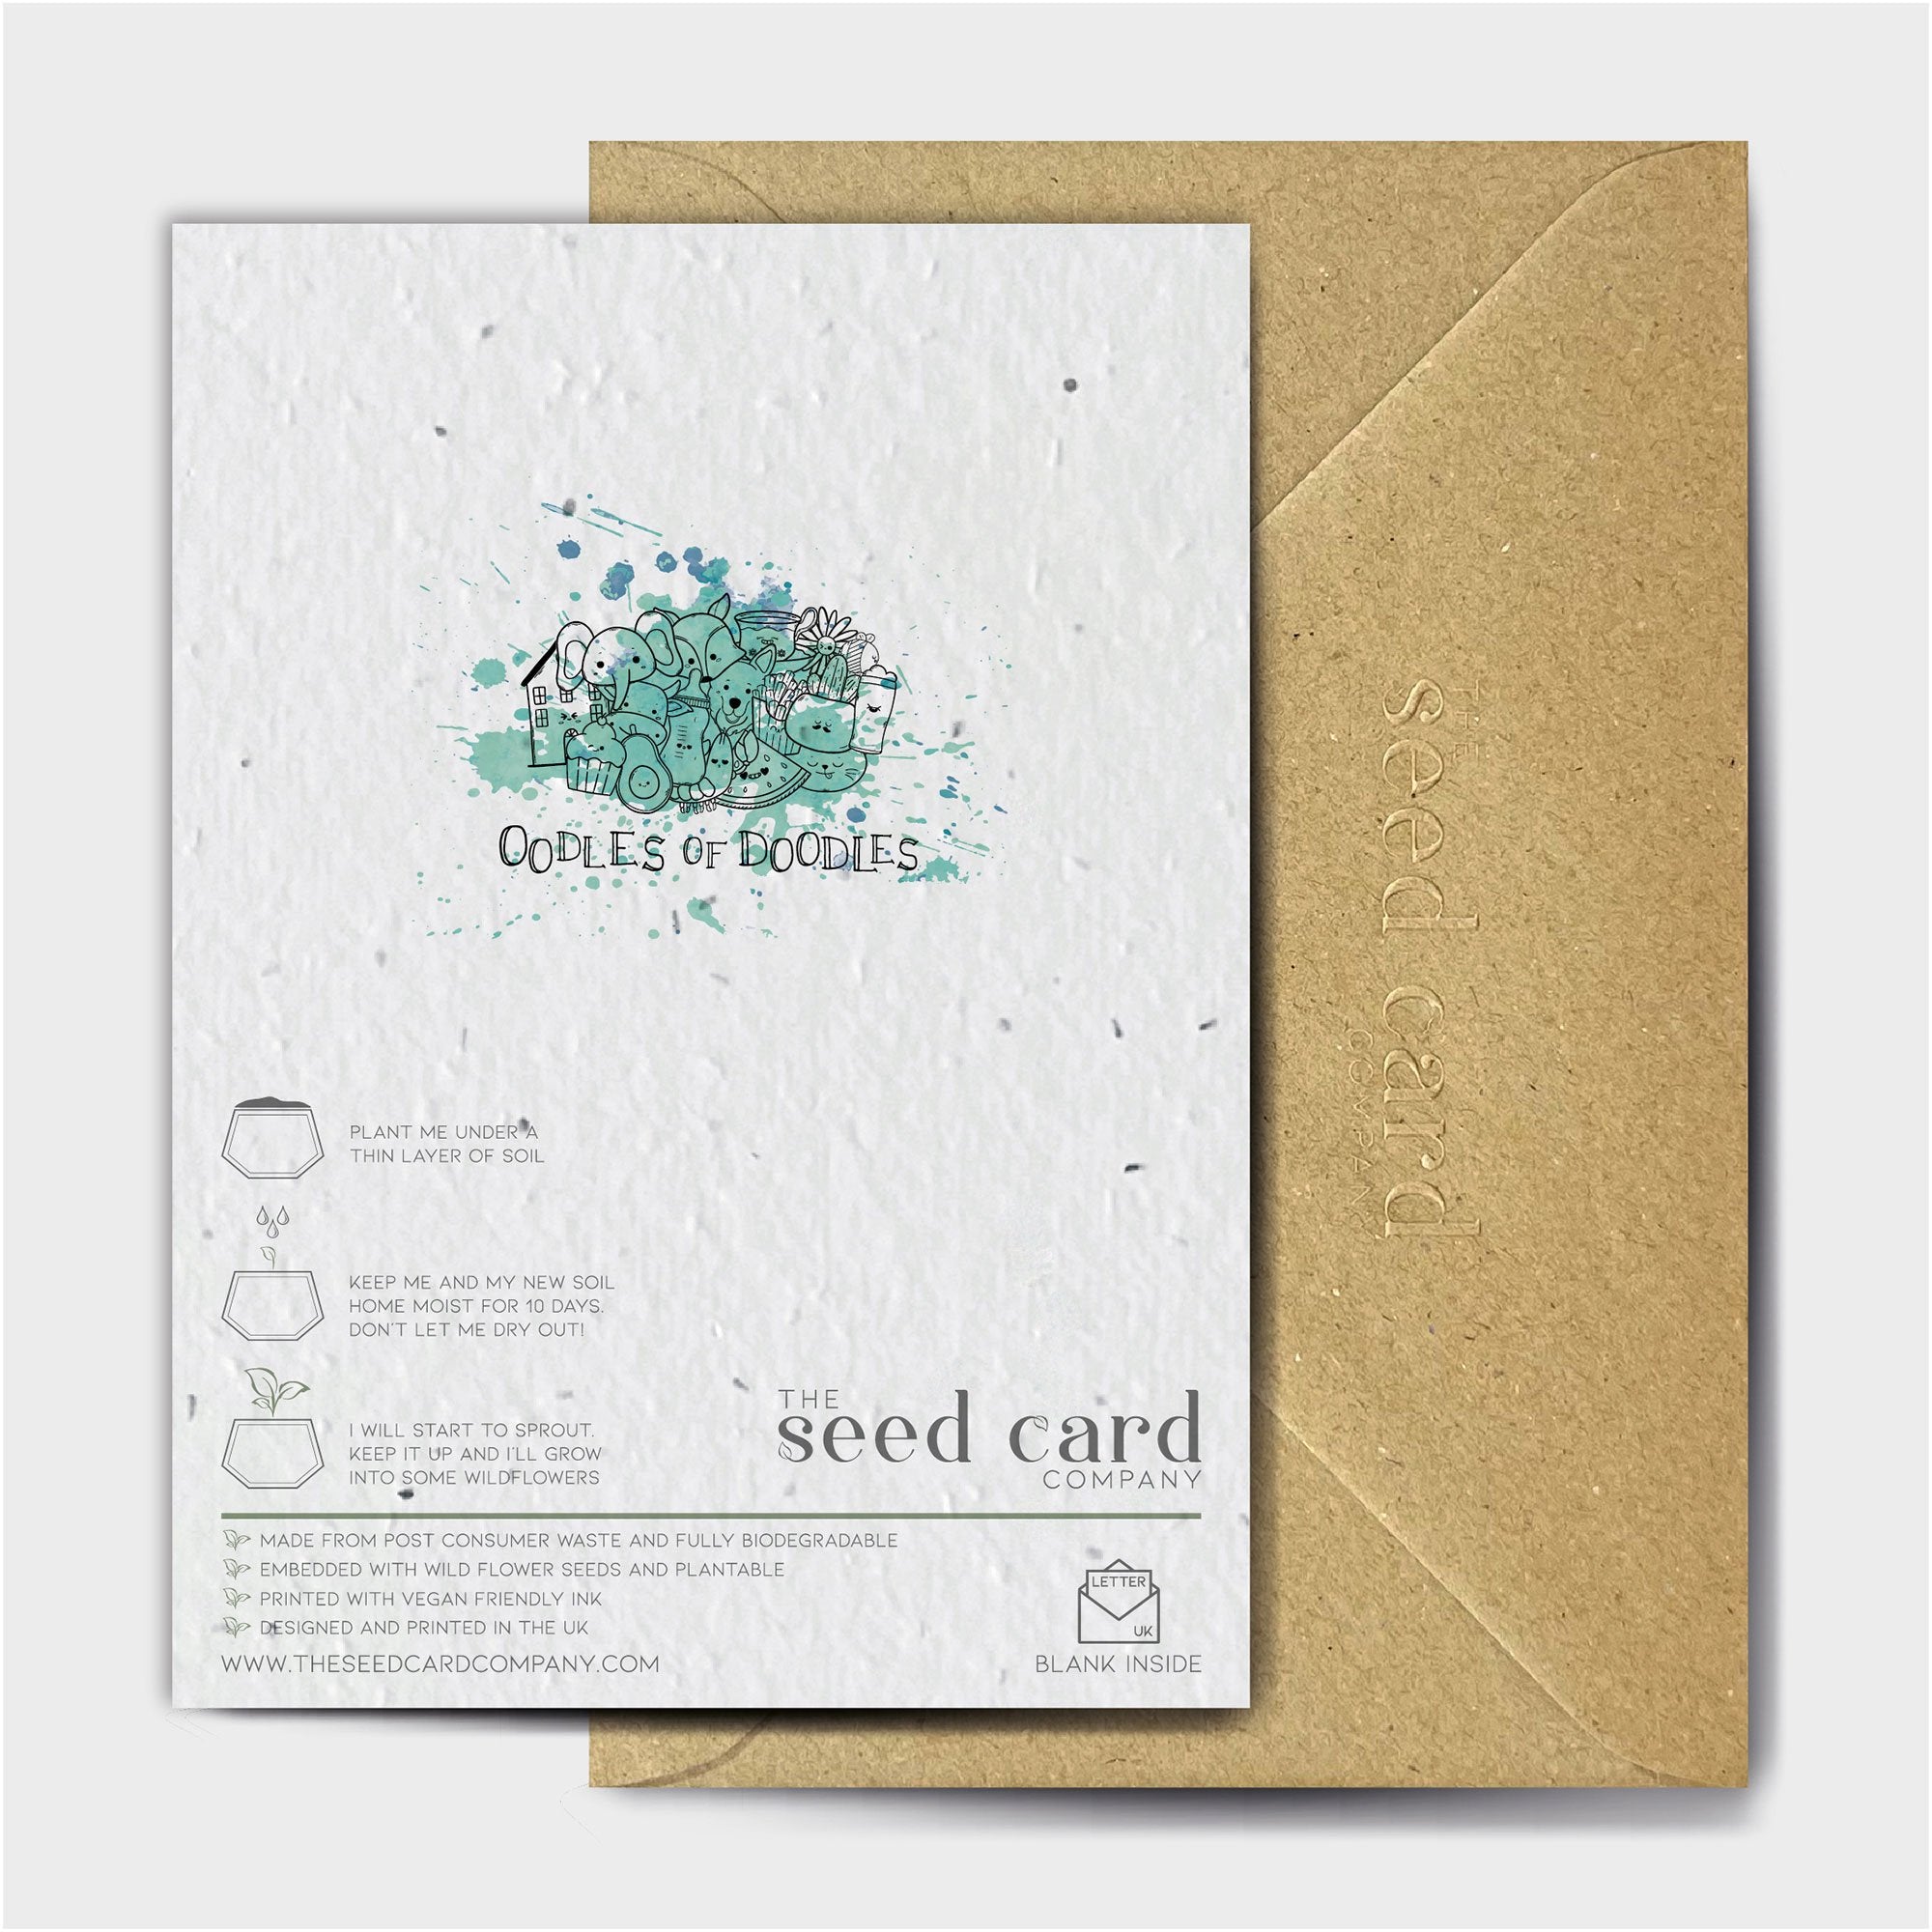 Shop online You Foxy Thing - 100% biodegradable seed-embedded cards Shop -The Seed Card Company